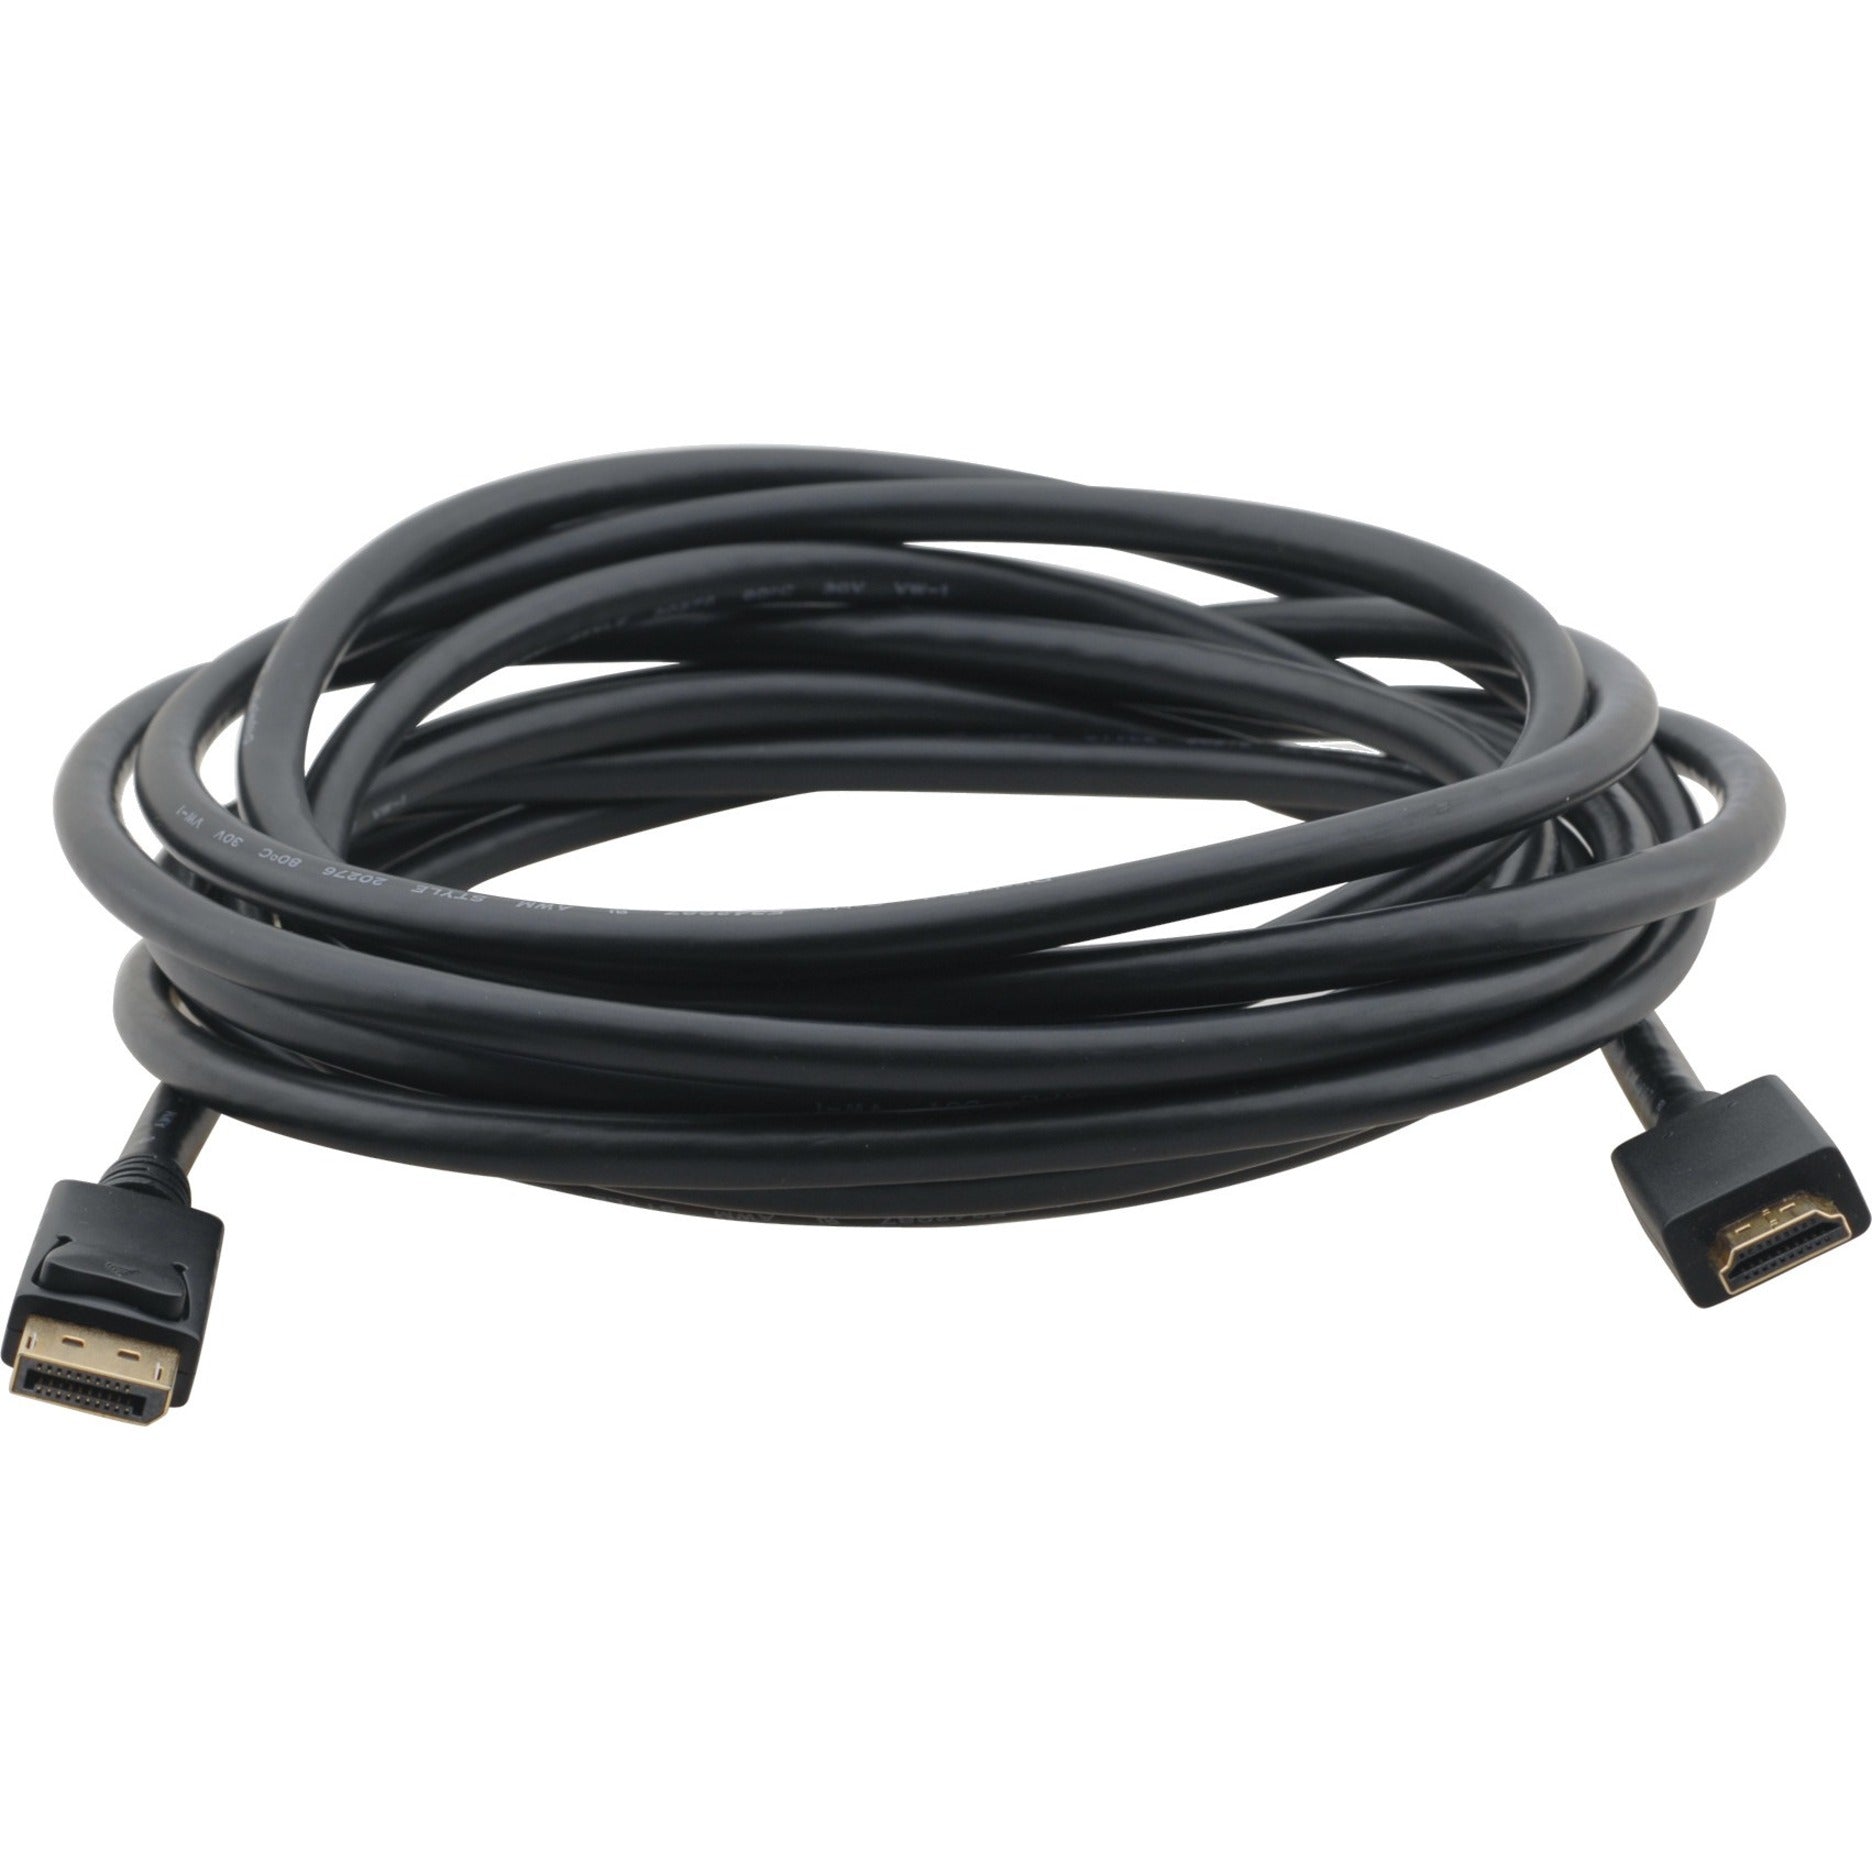 Kramer 97-0601015 DisplayPort to HDMI Cable, 15 ft - Connect Your Devices with Ease